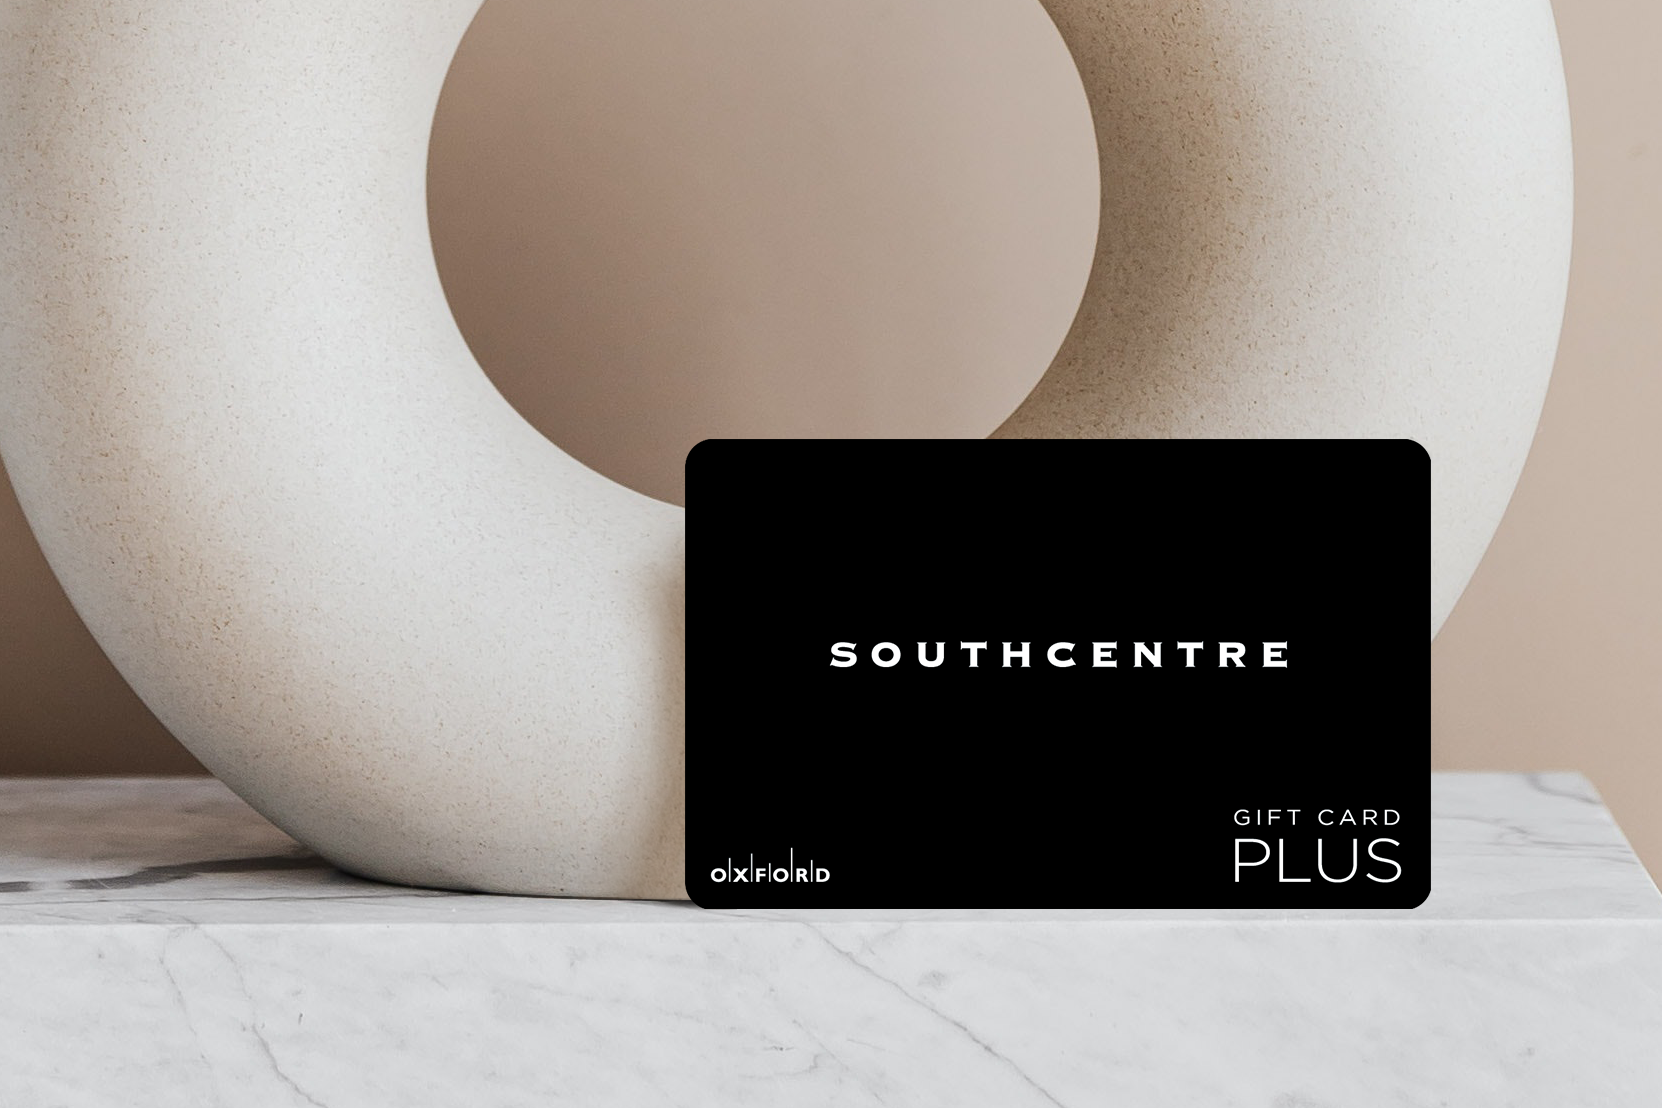 promotional image of a black southcentre gift card in front of an oval ceramic vase